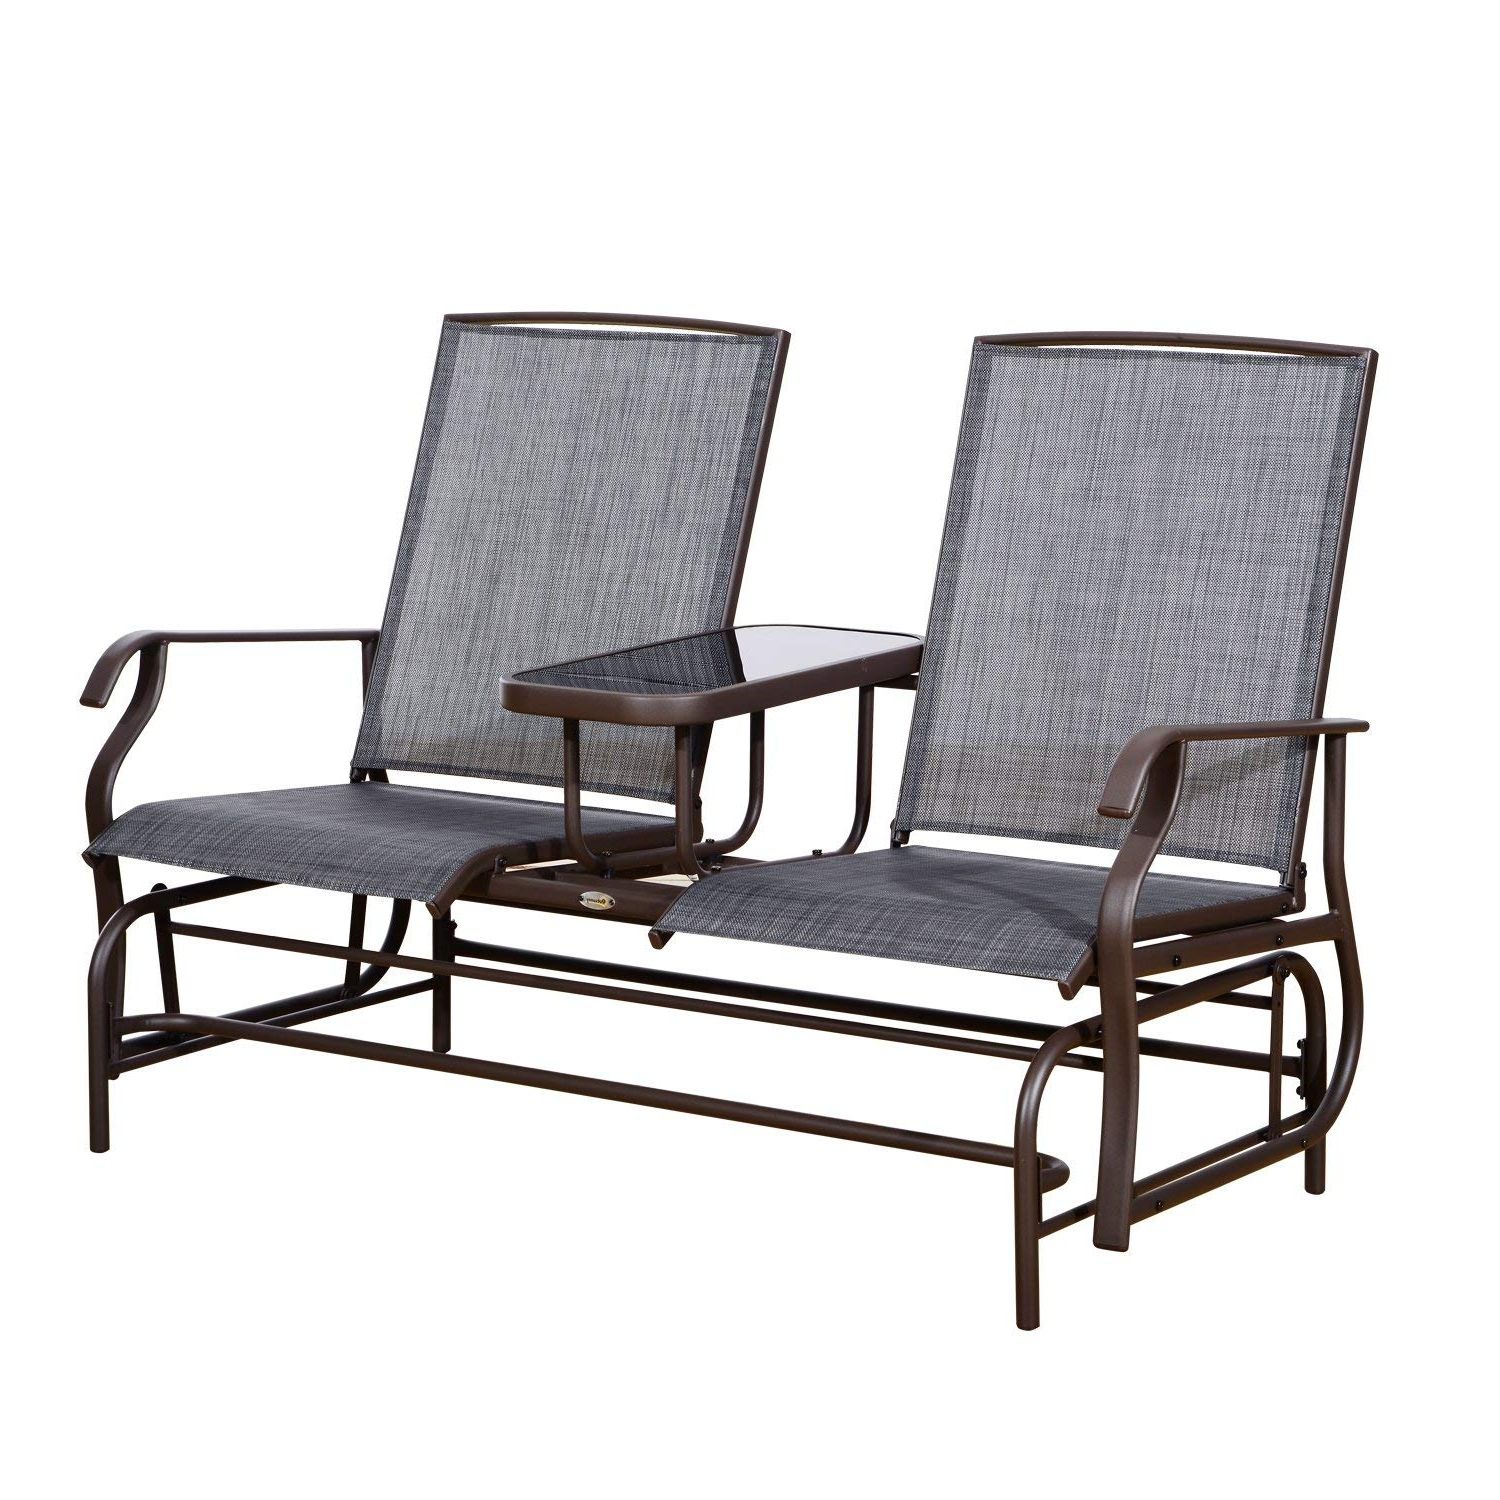 Patio Rocking Chairs And Gliders In Well Known Amazon : Outsunny 2 Person Outdoor Mesh Fabric Patio Double (View 3 of 15)